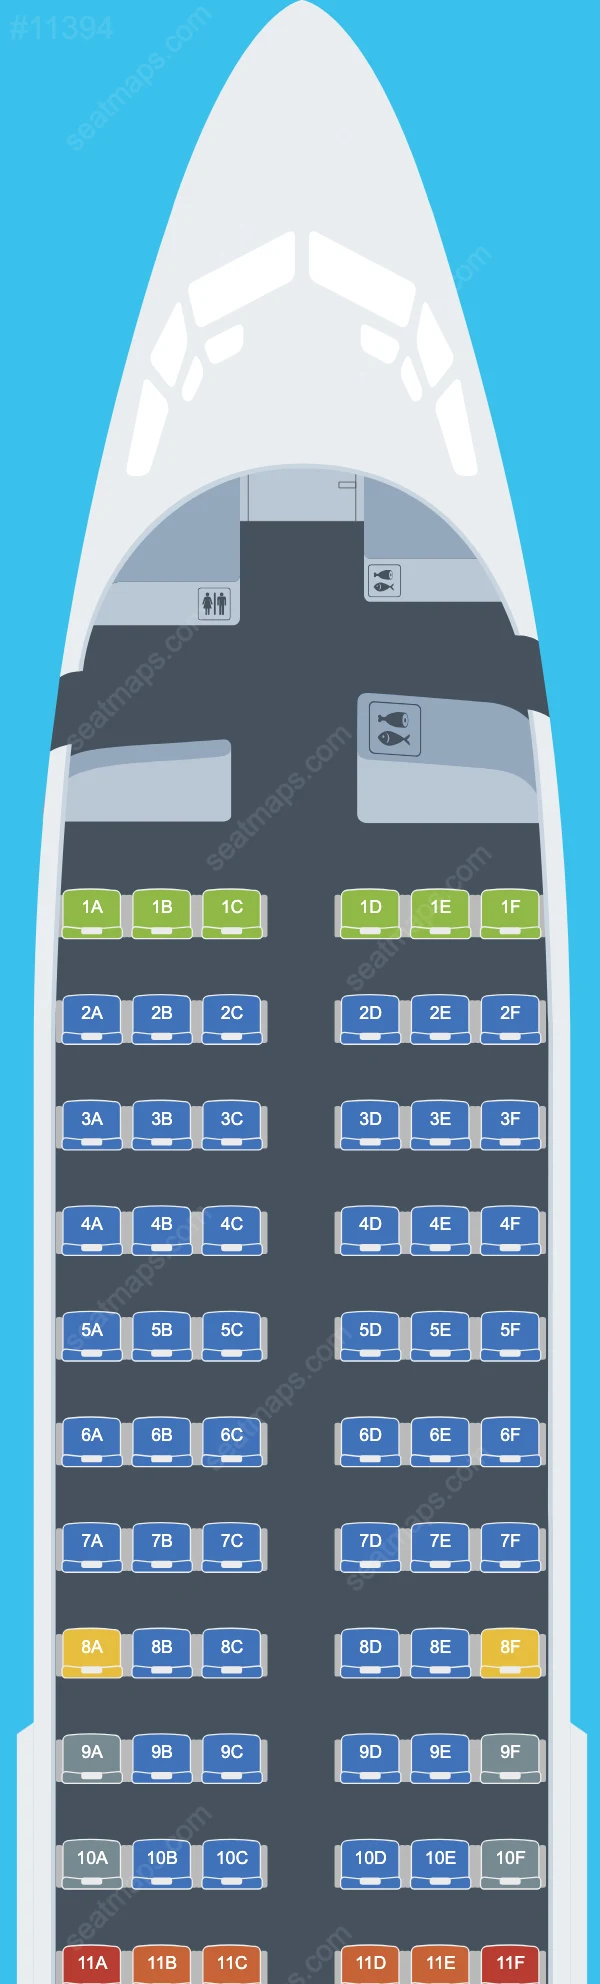 Hello Jets Boeing 737-700 seatmap preview